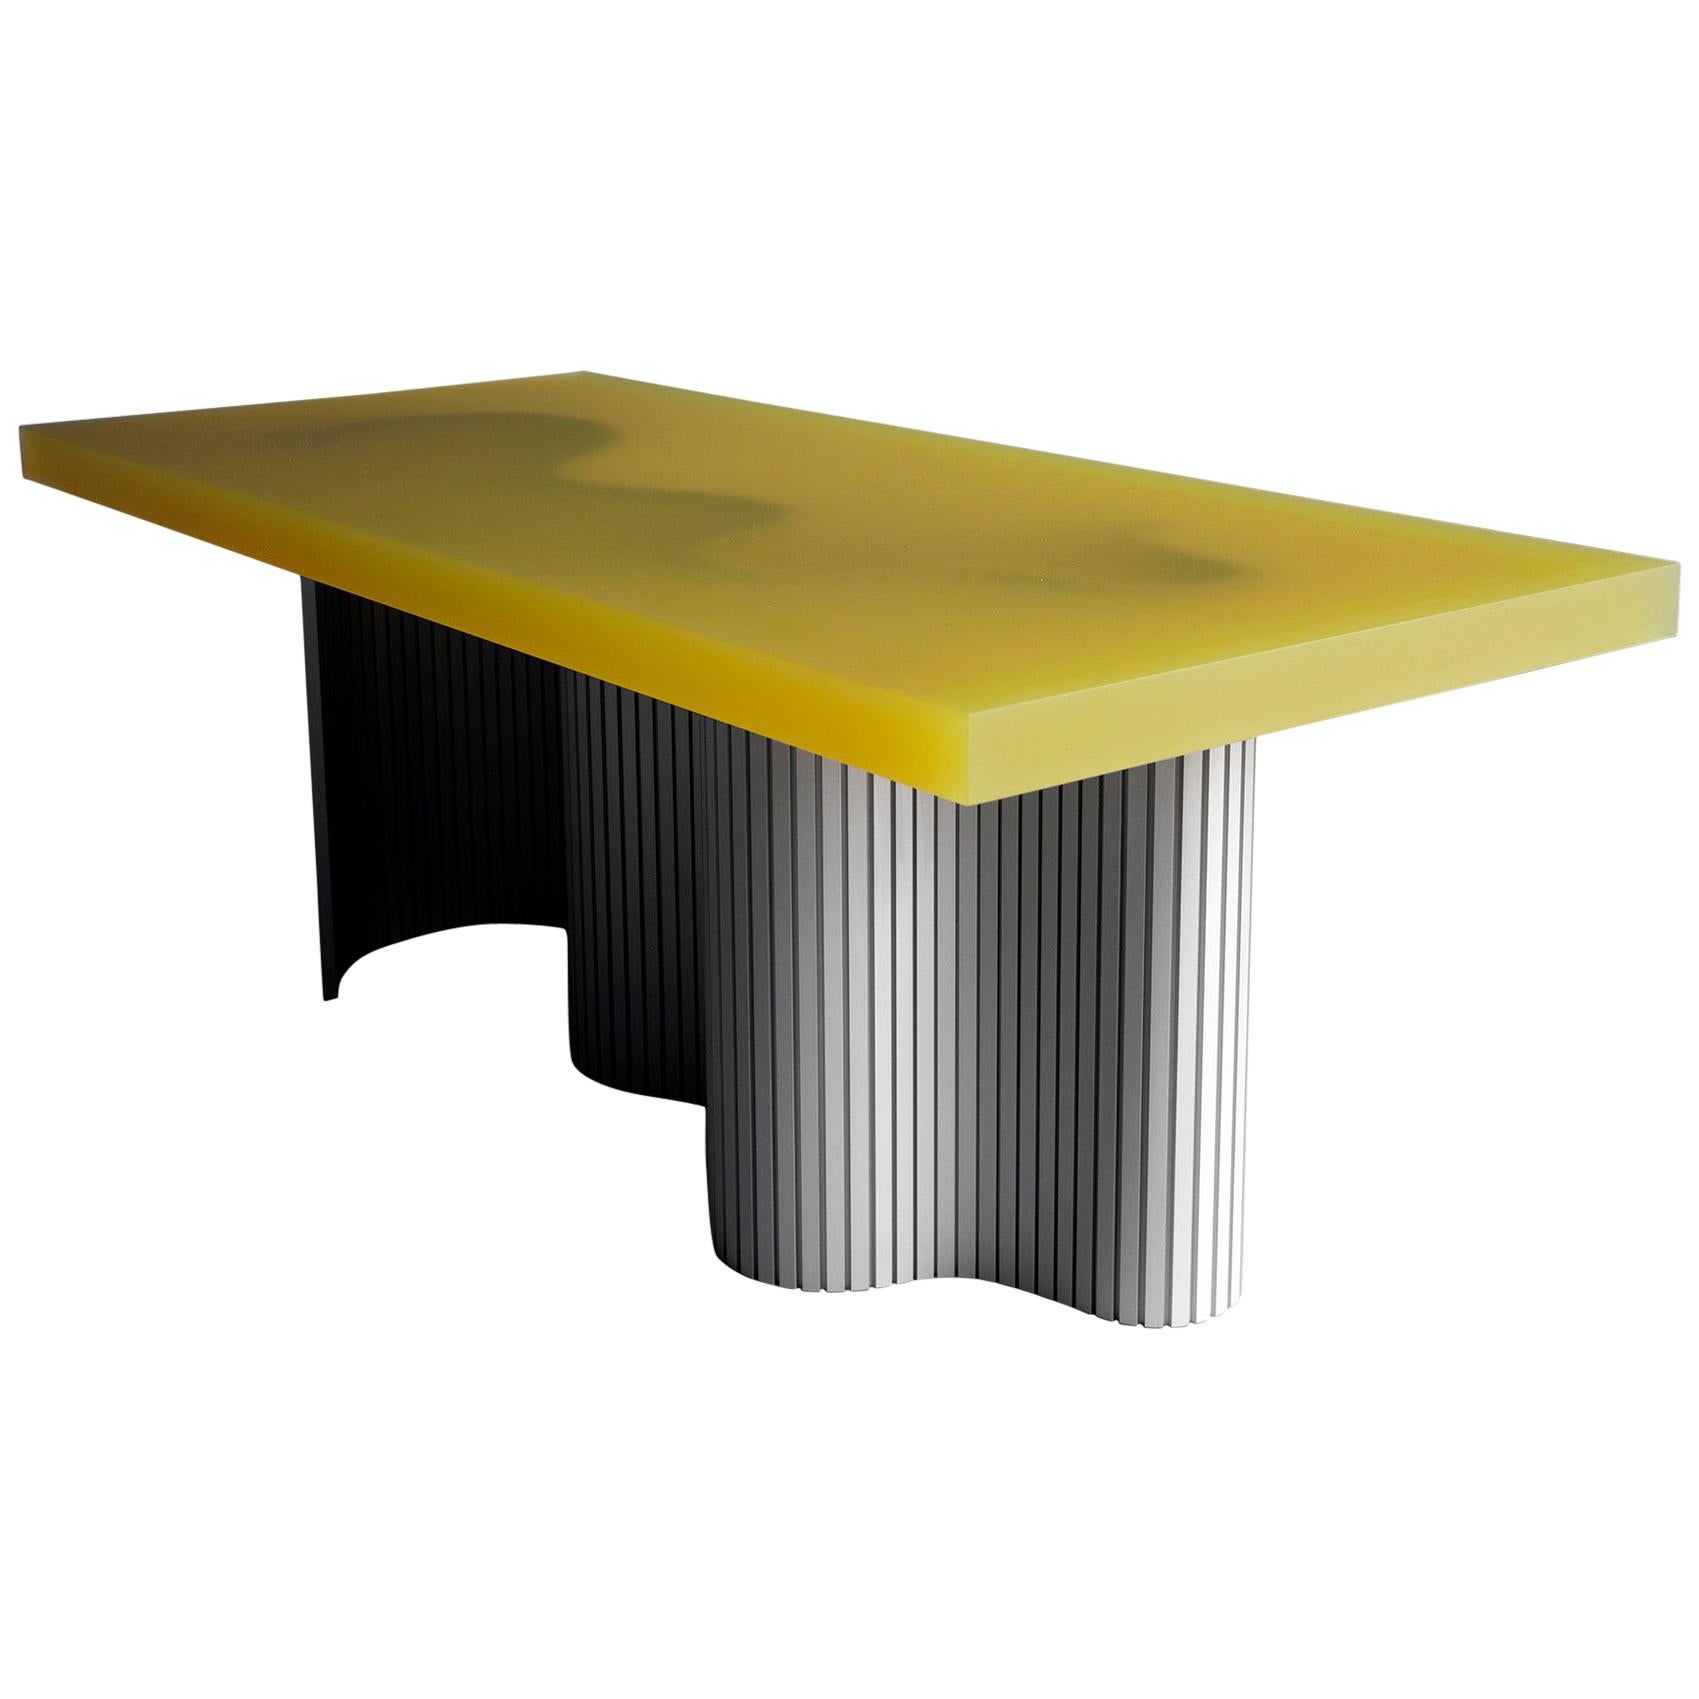 Contemporary Resin Coffee Table, Yellow Spine Table, by Erik Olovsson